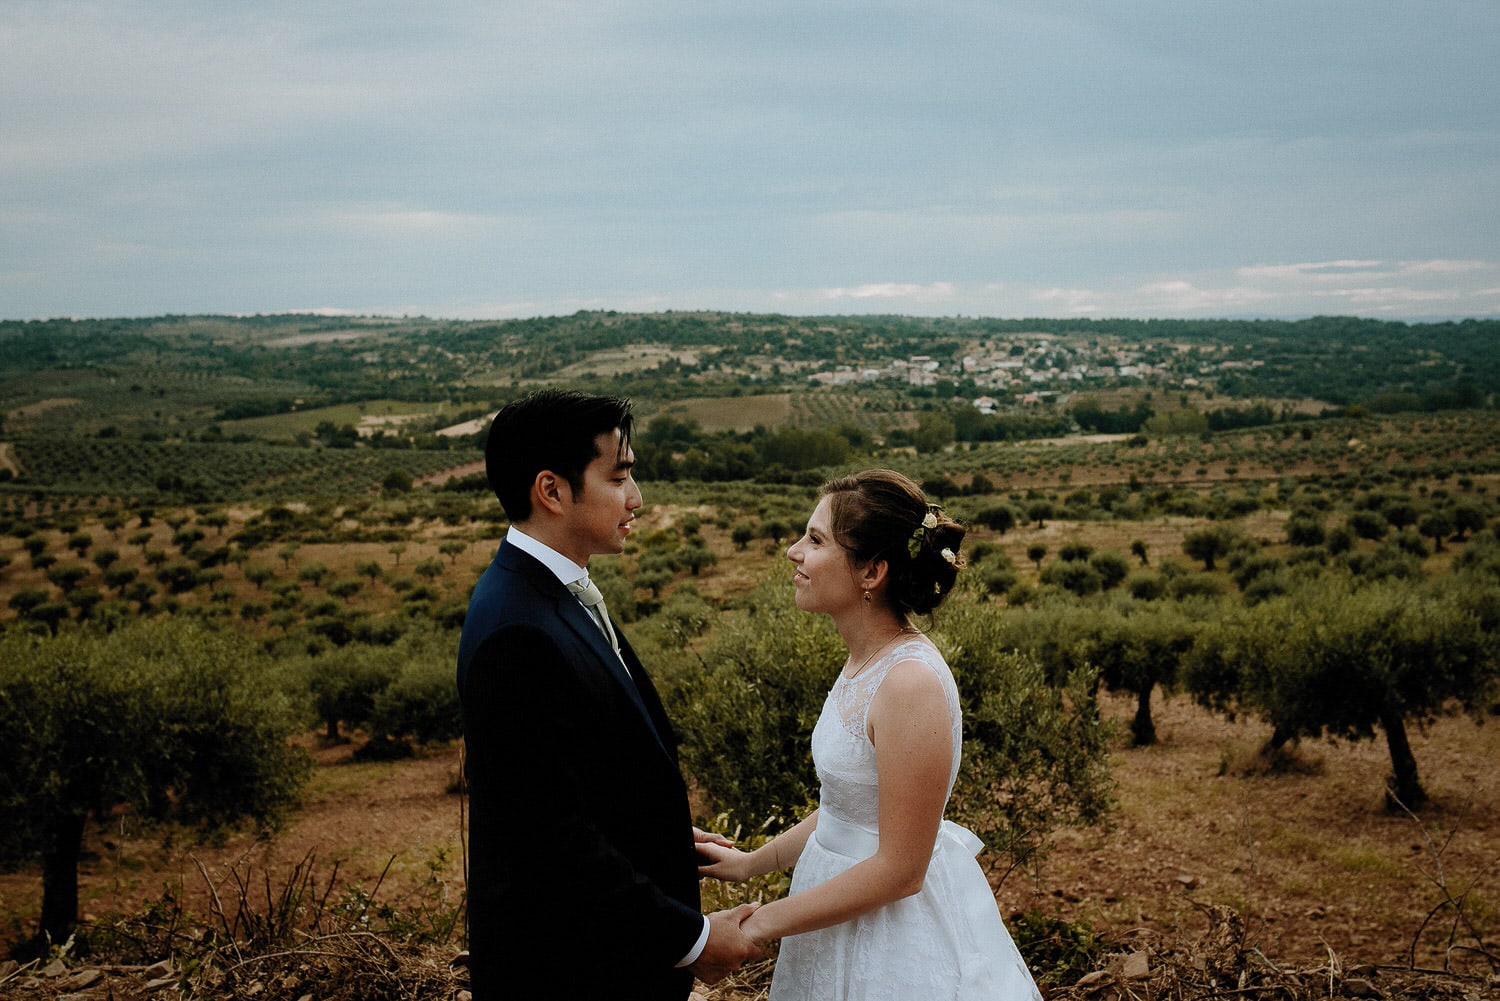 Charming Destination Wedding in the Portuguese Countryside - bride and groom looking at each other with the hilly landscape and olive trees behind them